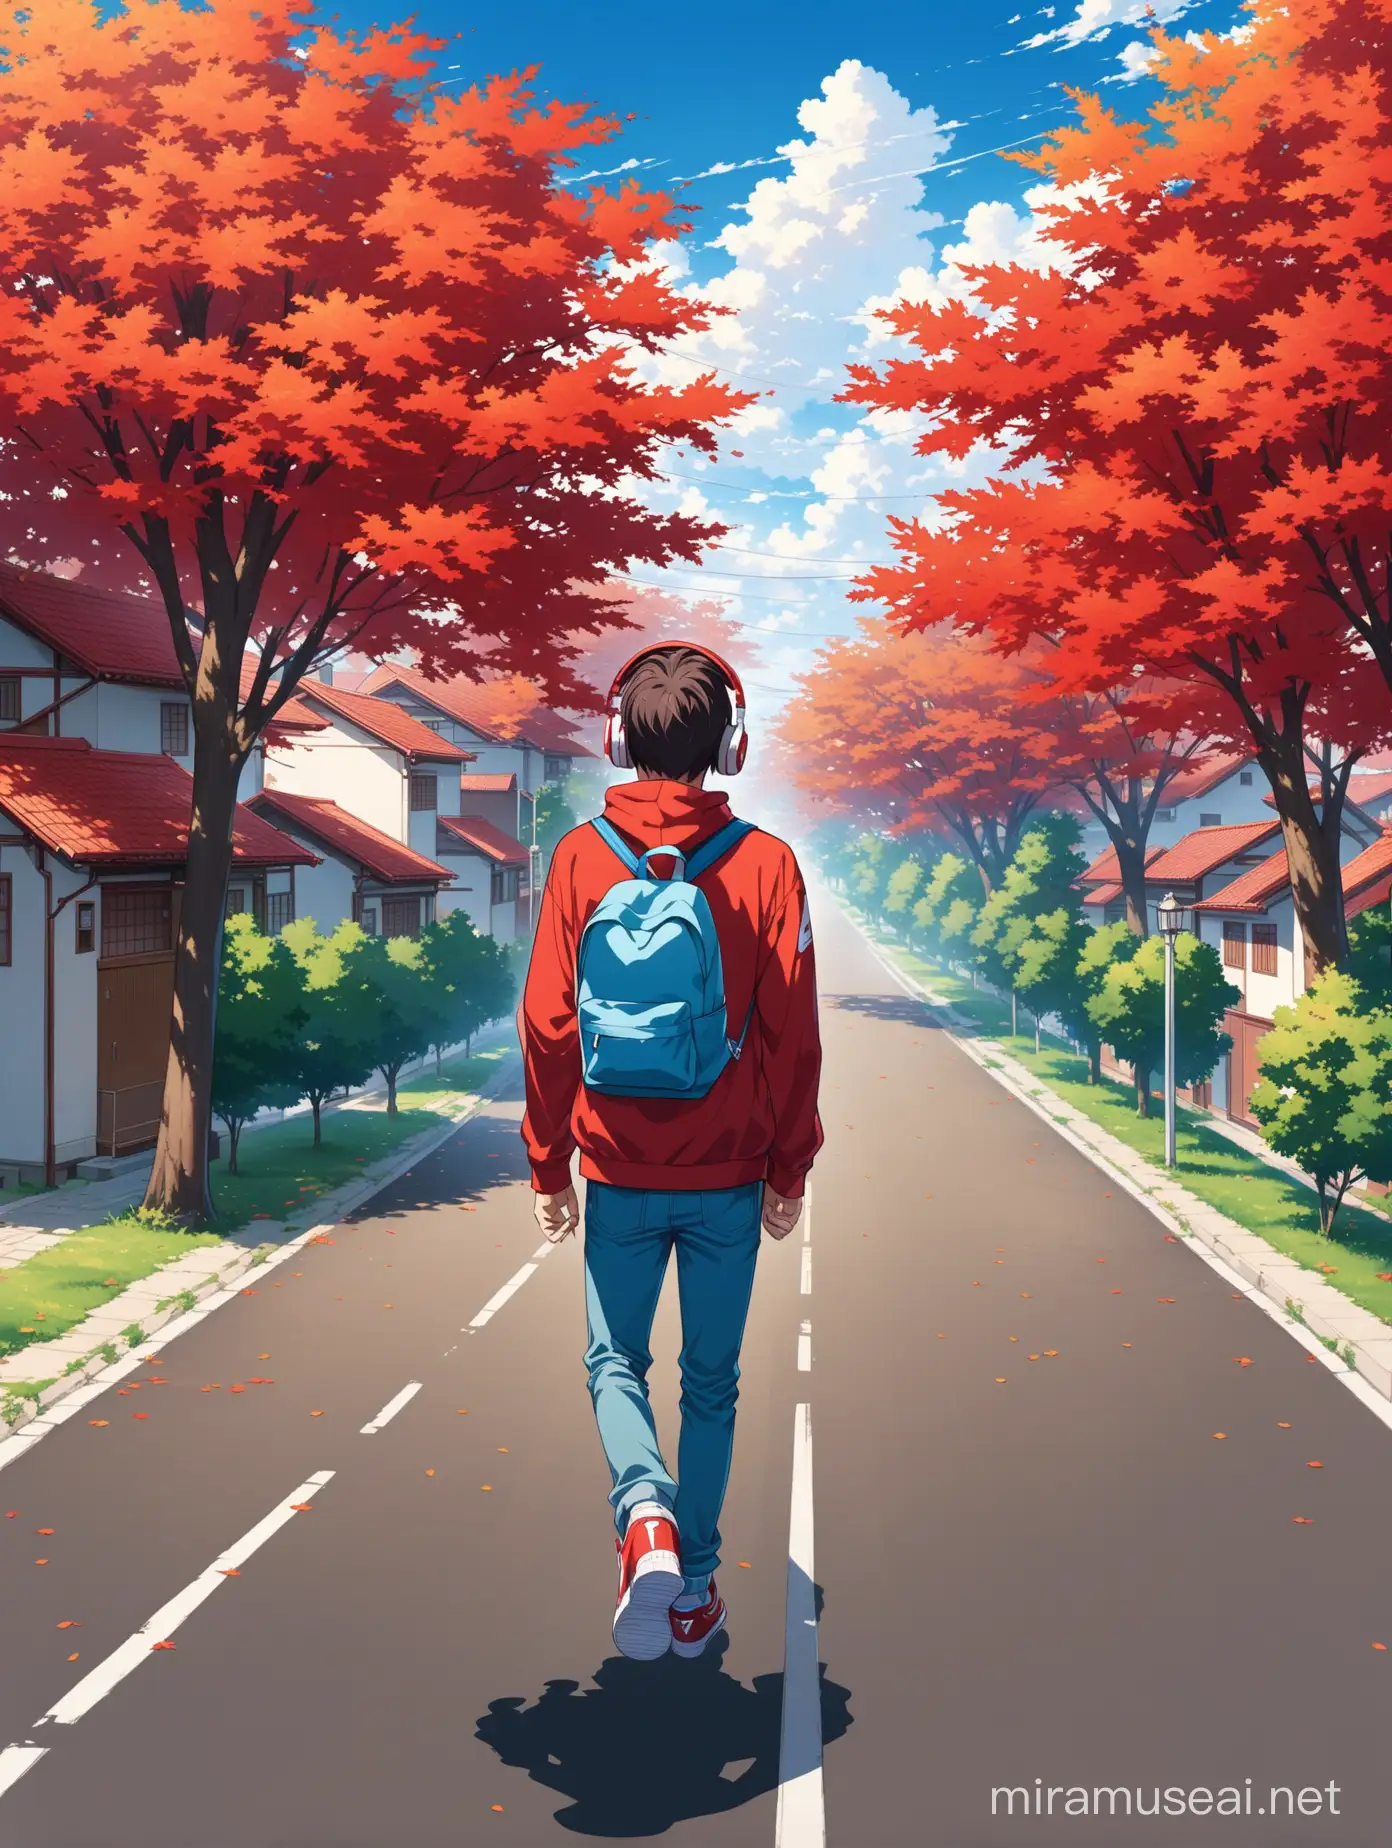 Anime: A handsome young man whose face we cannot see and who appears to us only from his back. He is walking on a long A wide road with cars passing, But the young man walks above the sidewalk with maple trees on either side of him, and a few cars passing by on the road. In front of him, the road ends in a small village whose houses have red tiled roofs and smokestacks from which smoke emerges. Background on the side is more. of brick houses. The boy is wearing a red hoodie, blue jeans, red Nike Dunk Low shoes, carrying a blue school backpack on his back, and wearing white string headphones.